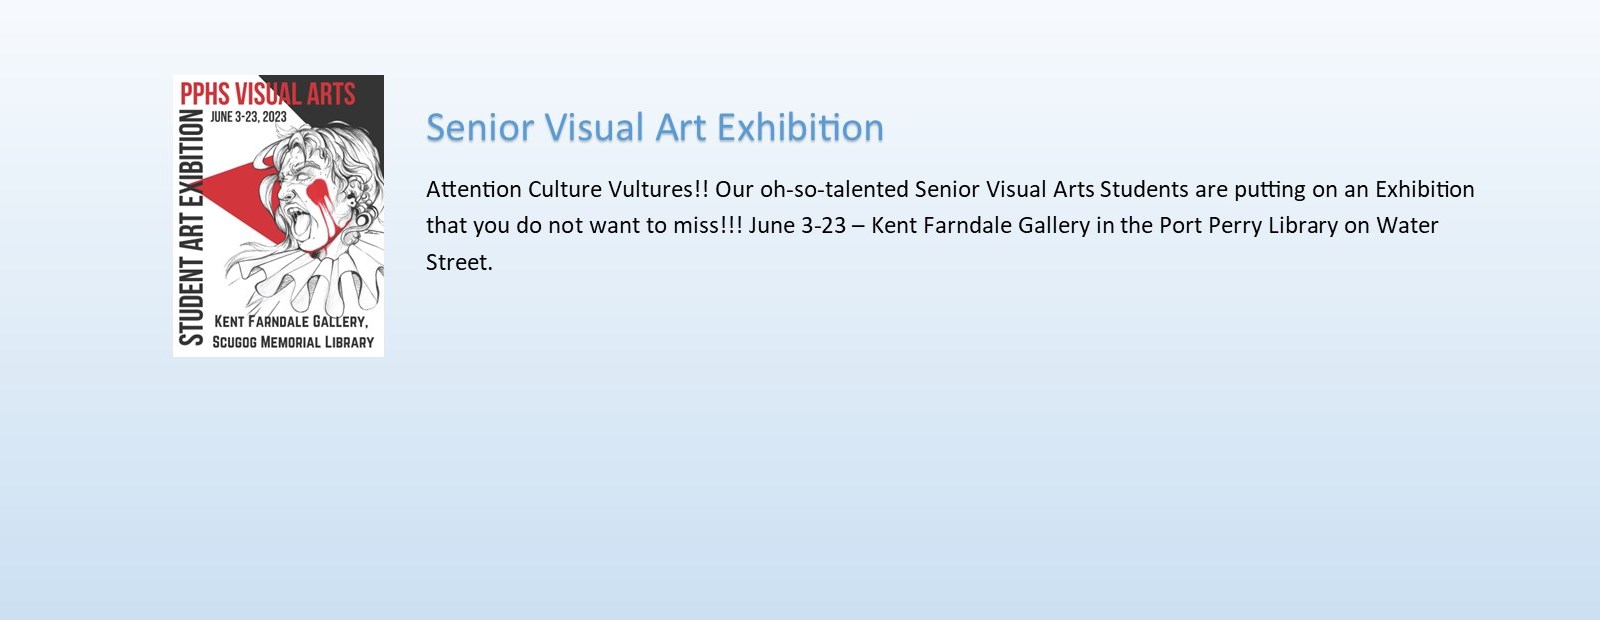 Image of Graphic Clown Face - Senior Visual Arts Exhibition June 3 - 23 Kent Farndale Gallery Port Perry Library 